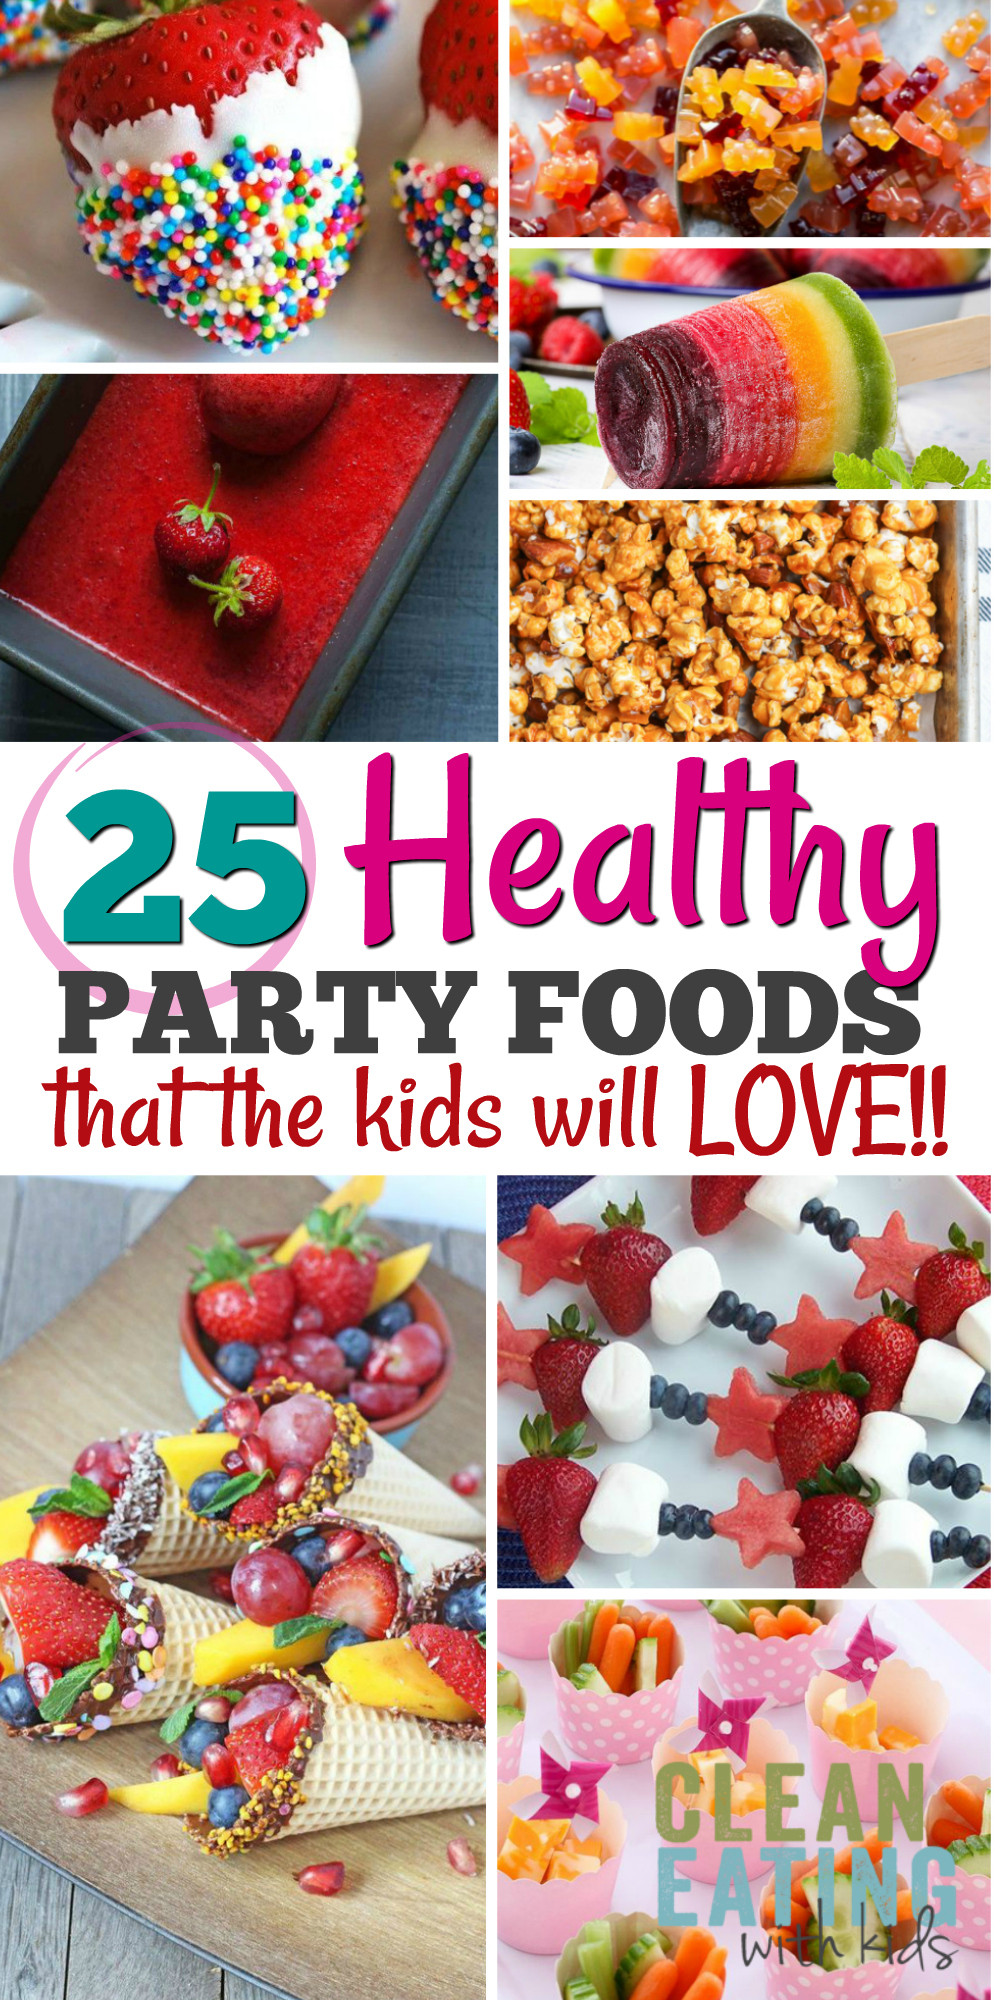 Birthday Party Food Ideas
 25 Healthy Birthday Party Food Ideas Clean Eating with kids